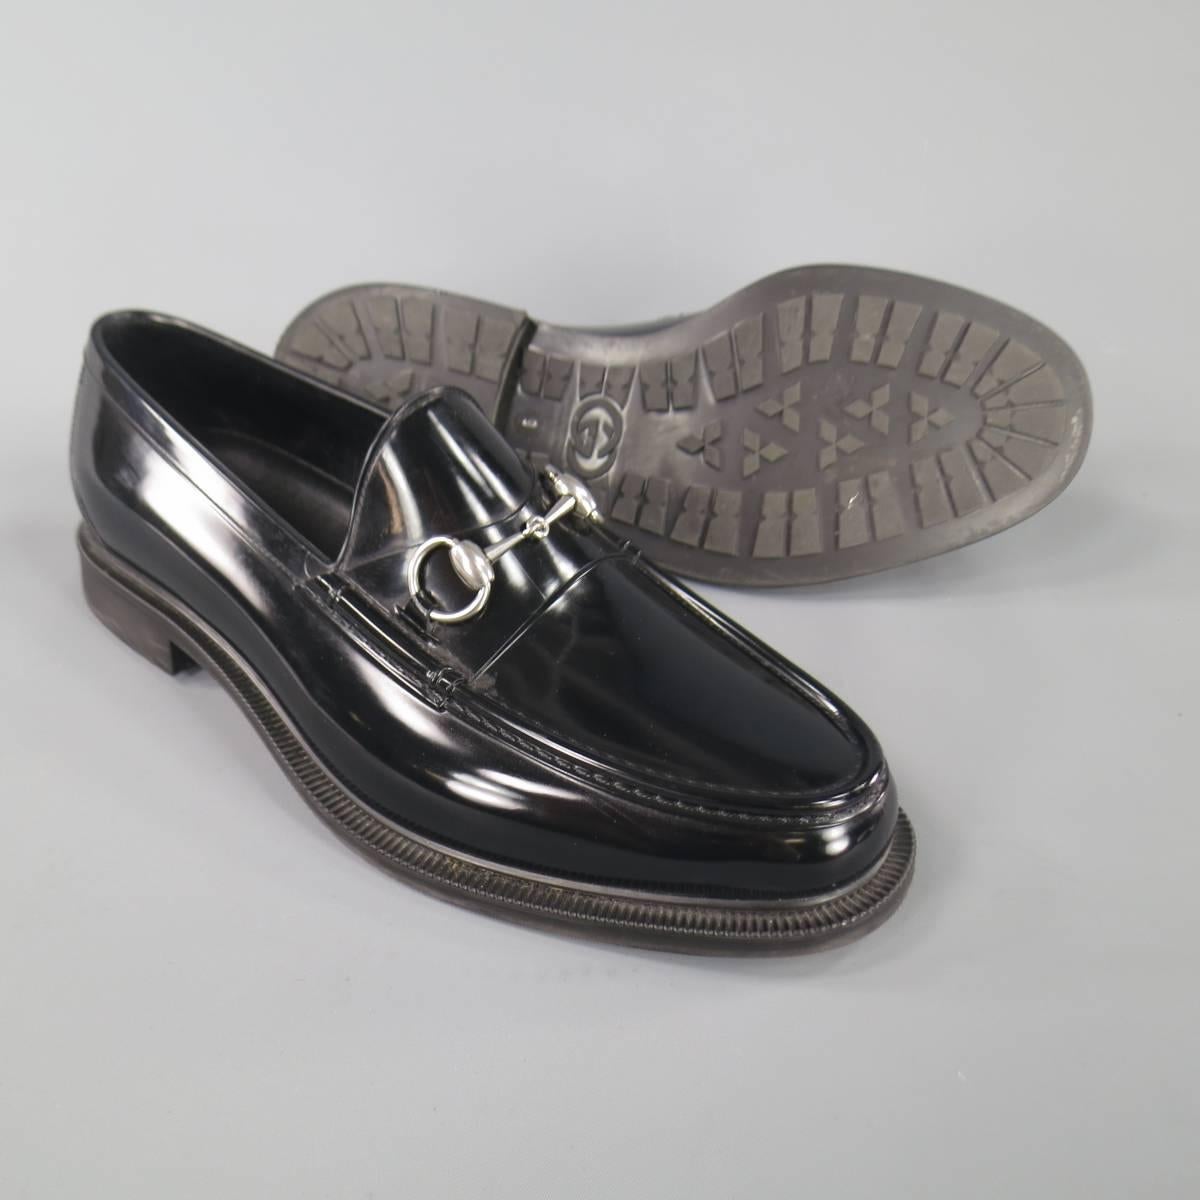 Chic Men's GUCCI loafers in monochromatic black glossy rubber with top stitch tow and silver tone horsebit. Made in Italy.
 
Excellent Pre-Owned Condition.
Marked: UK 9
 
Measurements:
 
Outsole: 12 in X 4.5 in.
